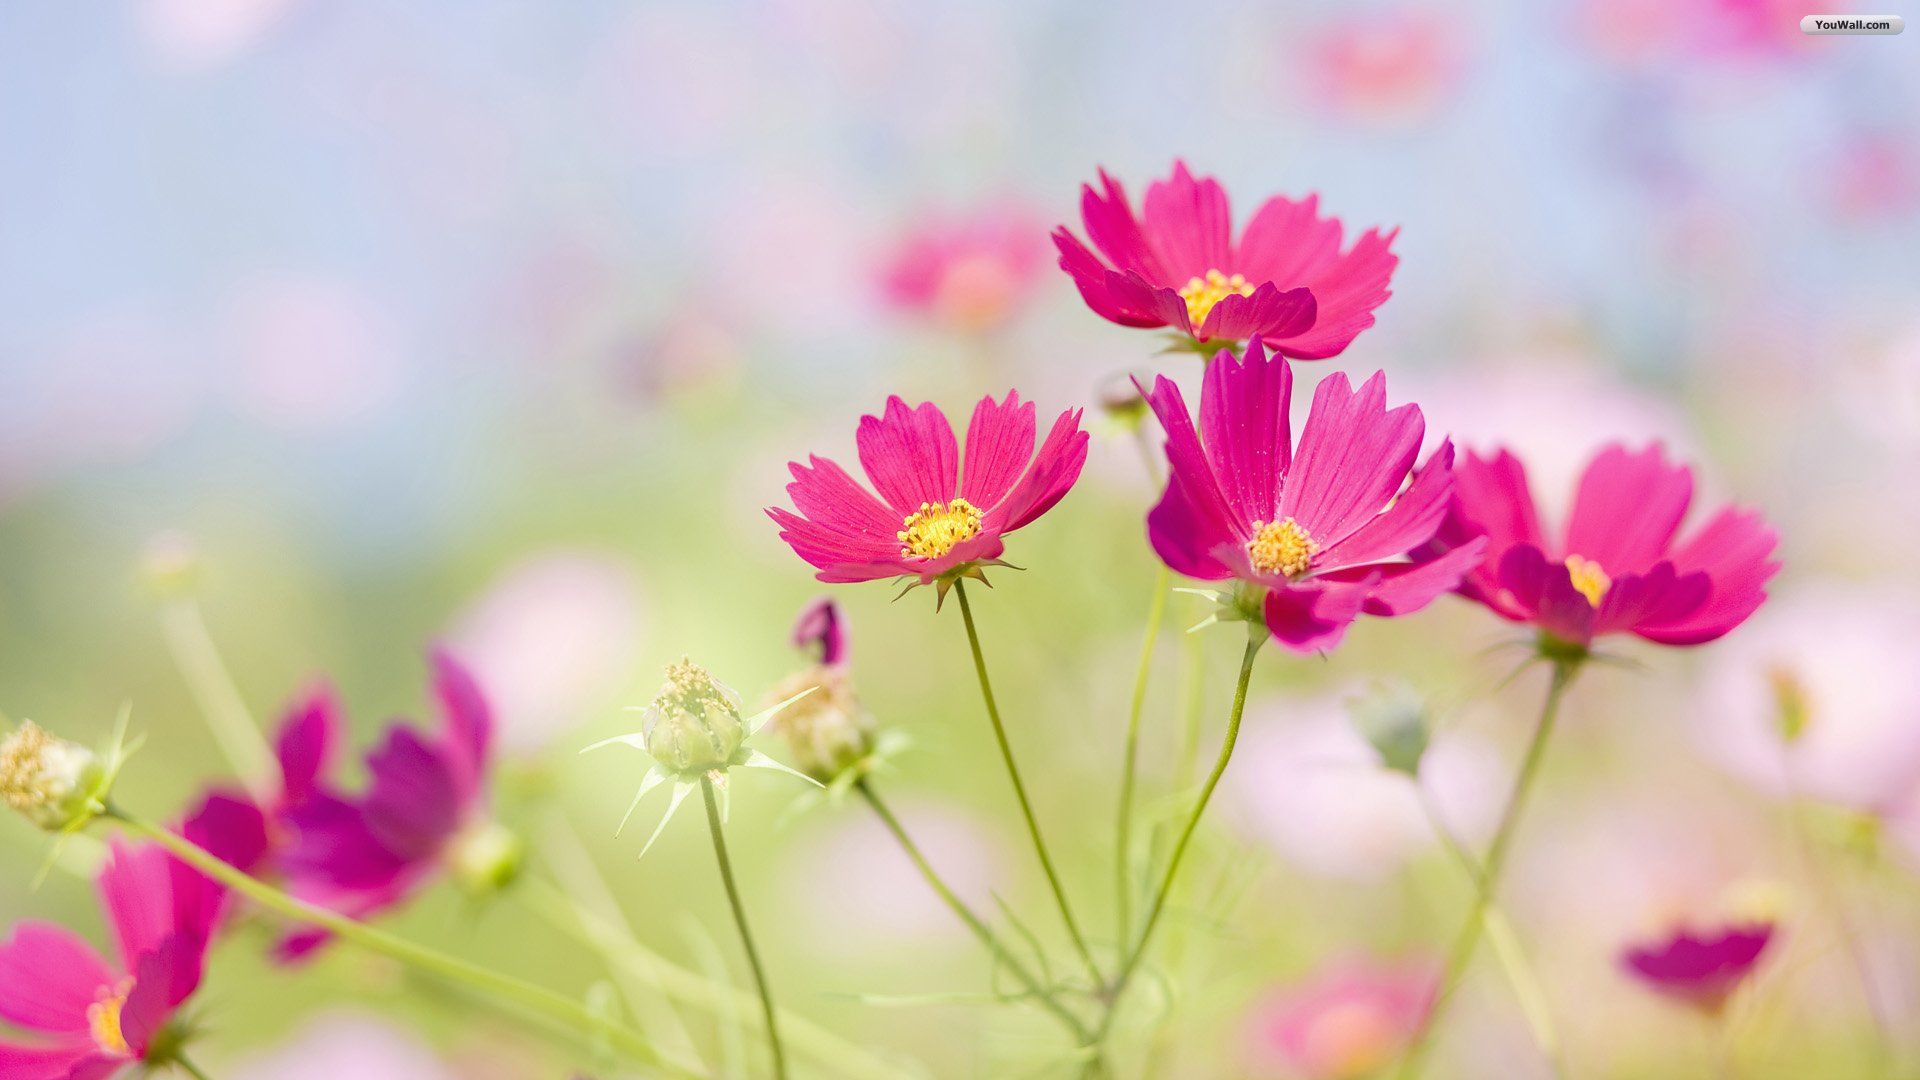 Free Beautiful Flowers Images For Desktop High Quality Wallpaper ...